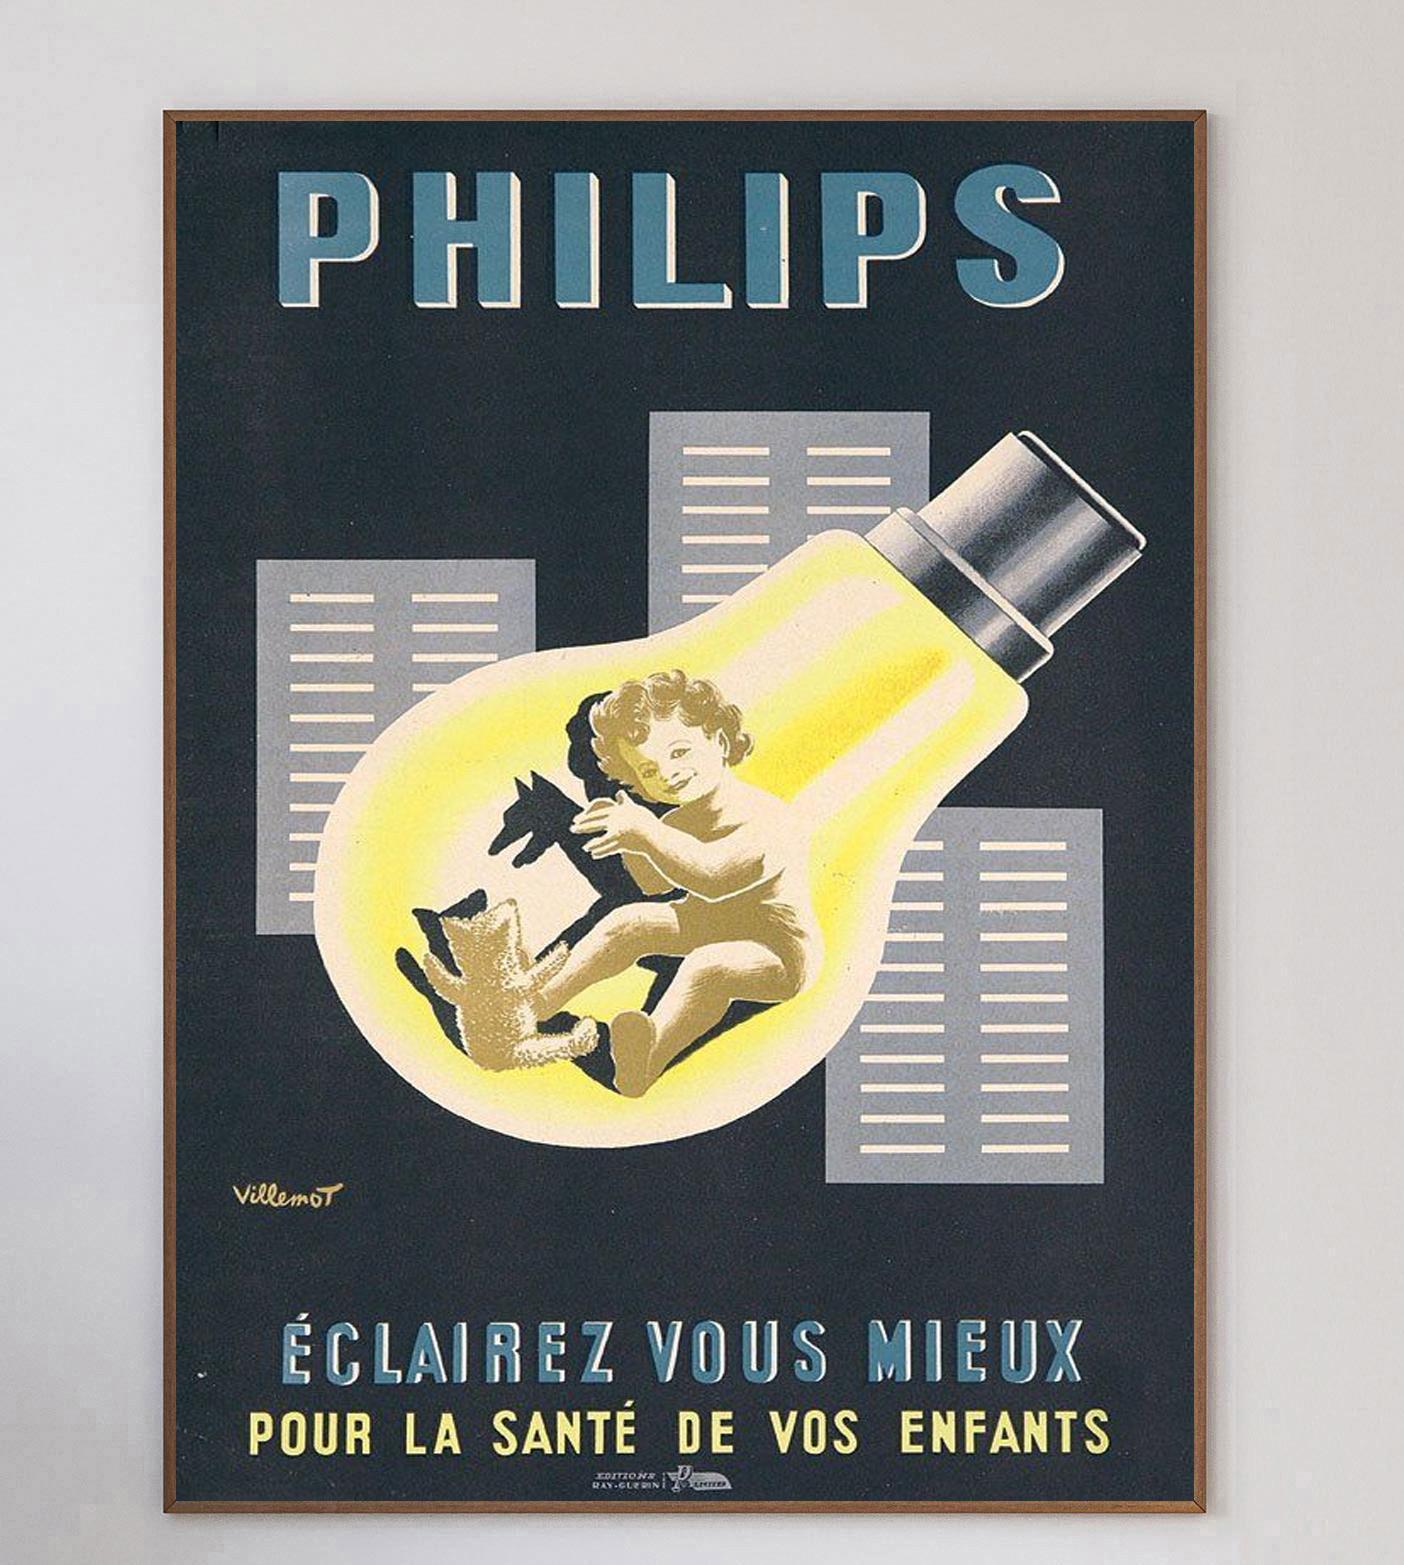 This incredibly rare poster was created in 1950 to advertise Dutch electronics brand Philips. Founded in 1891, Philips was one of the biggest electronics brands in the UK and continues to trade today, focusing on health technology. Reading 